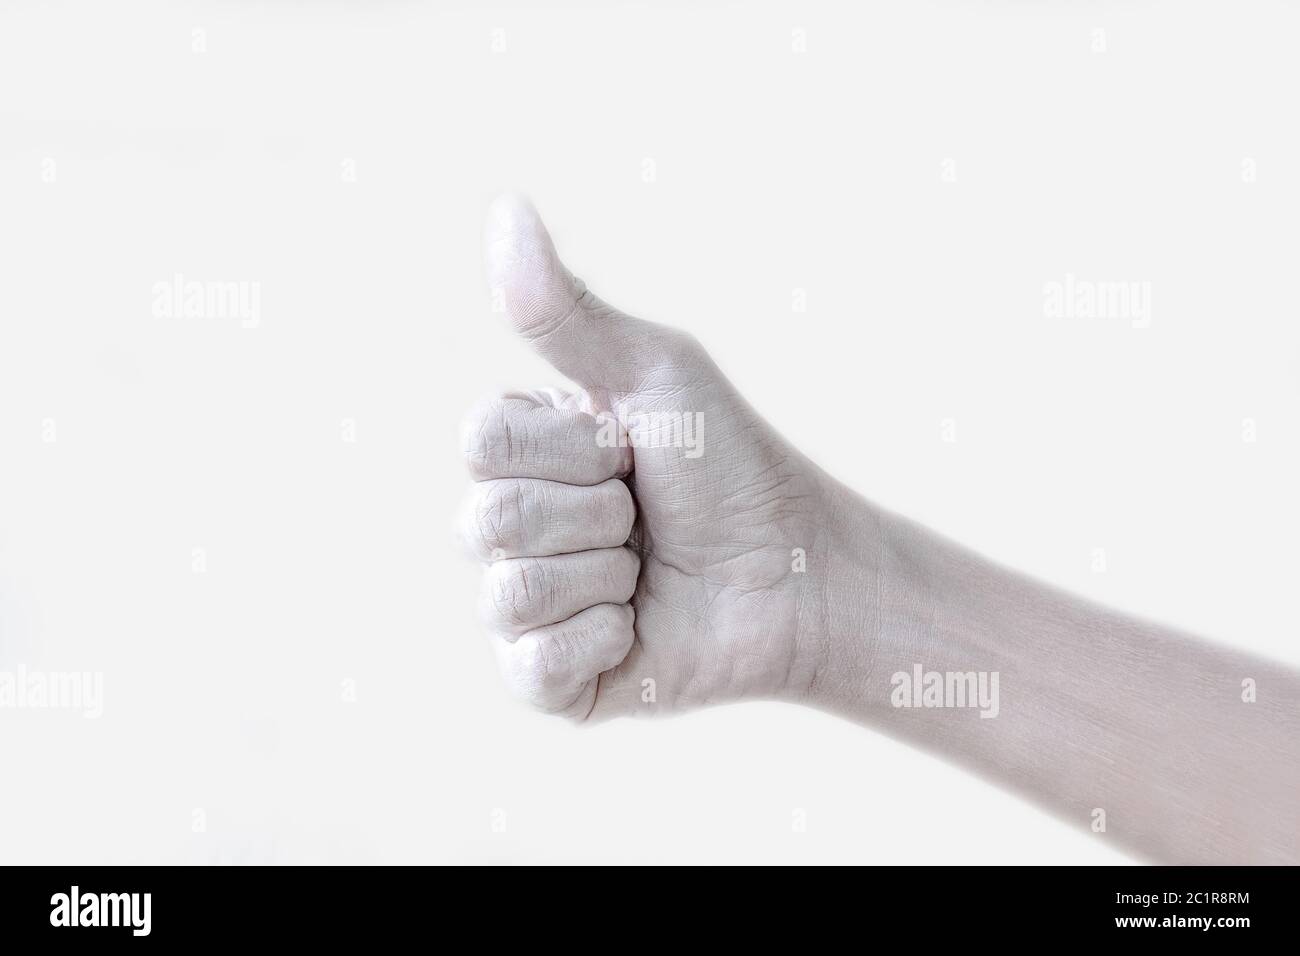 Gesture, position and expression with feminine hands and fingers Stock Photo